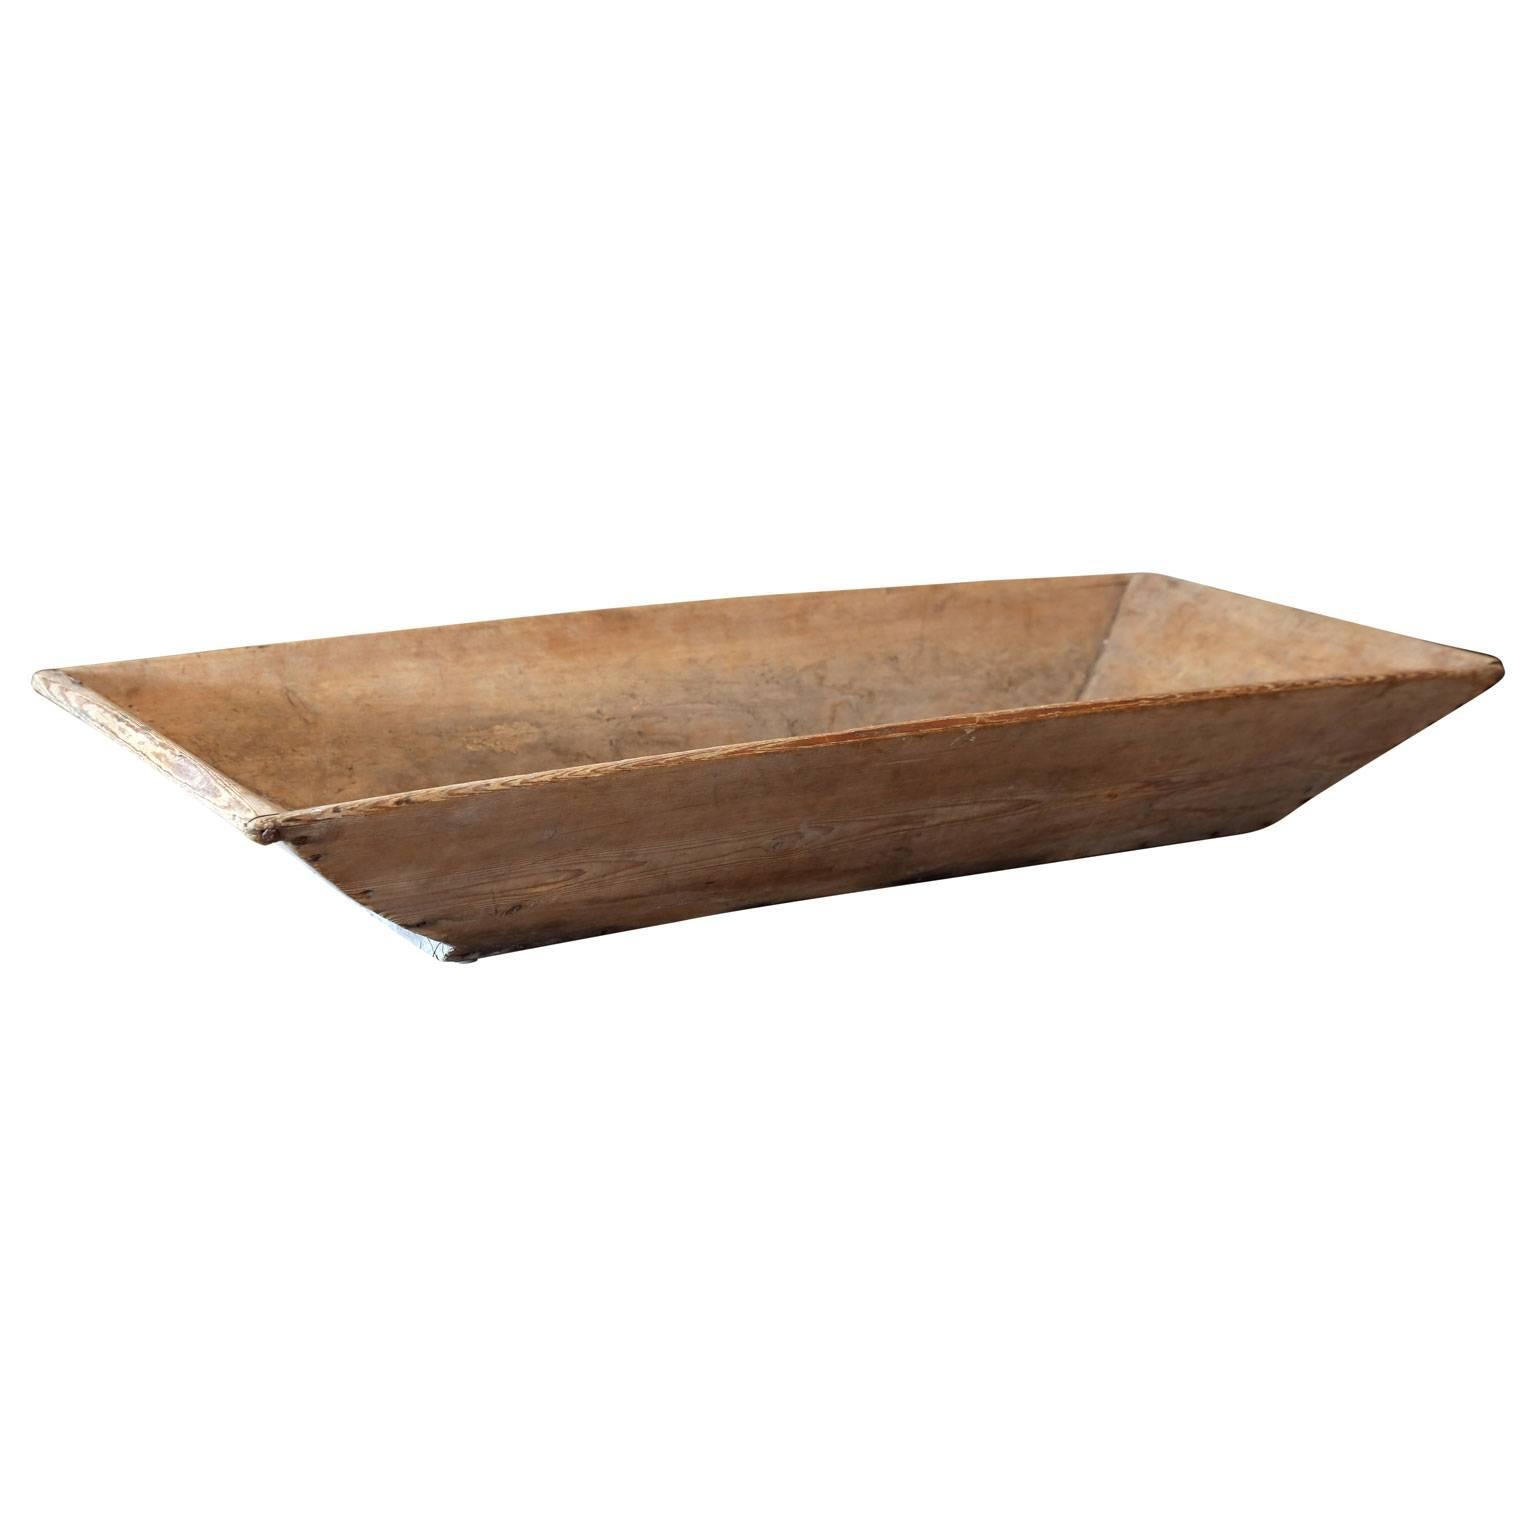 Large 19th century Swedish wooden trencher bowl. Hand carved wood serving trencher or dough bowl.

Note: Original/early finish on antique and vintage metal will include some, or all, of the following: patina, scaling, light rust, discoloration, and